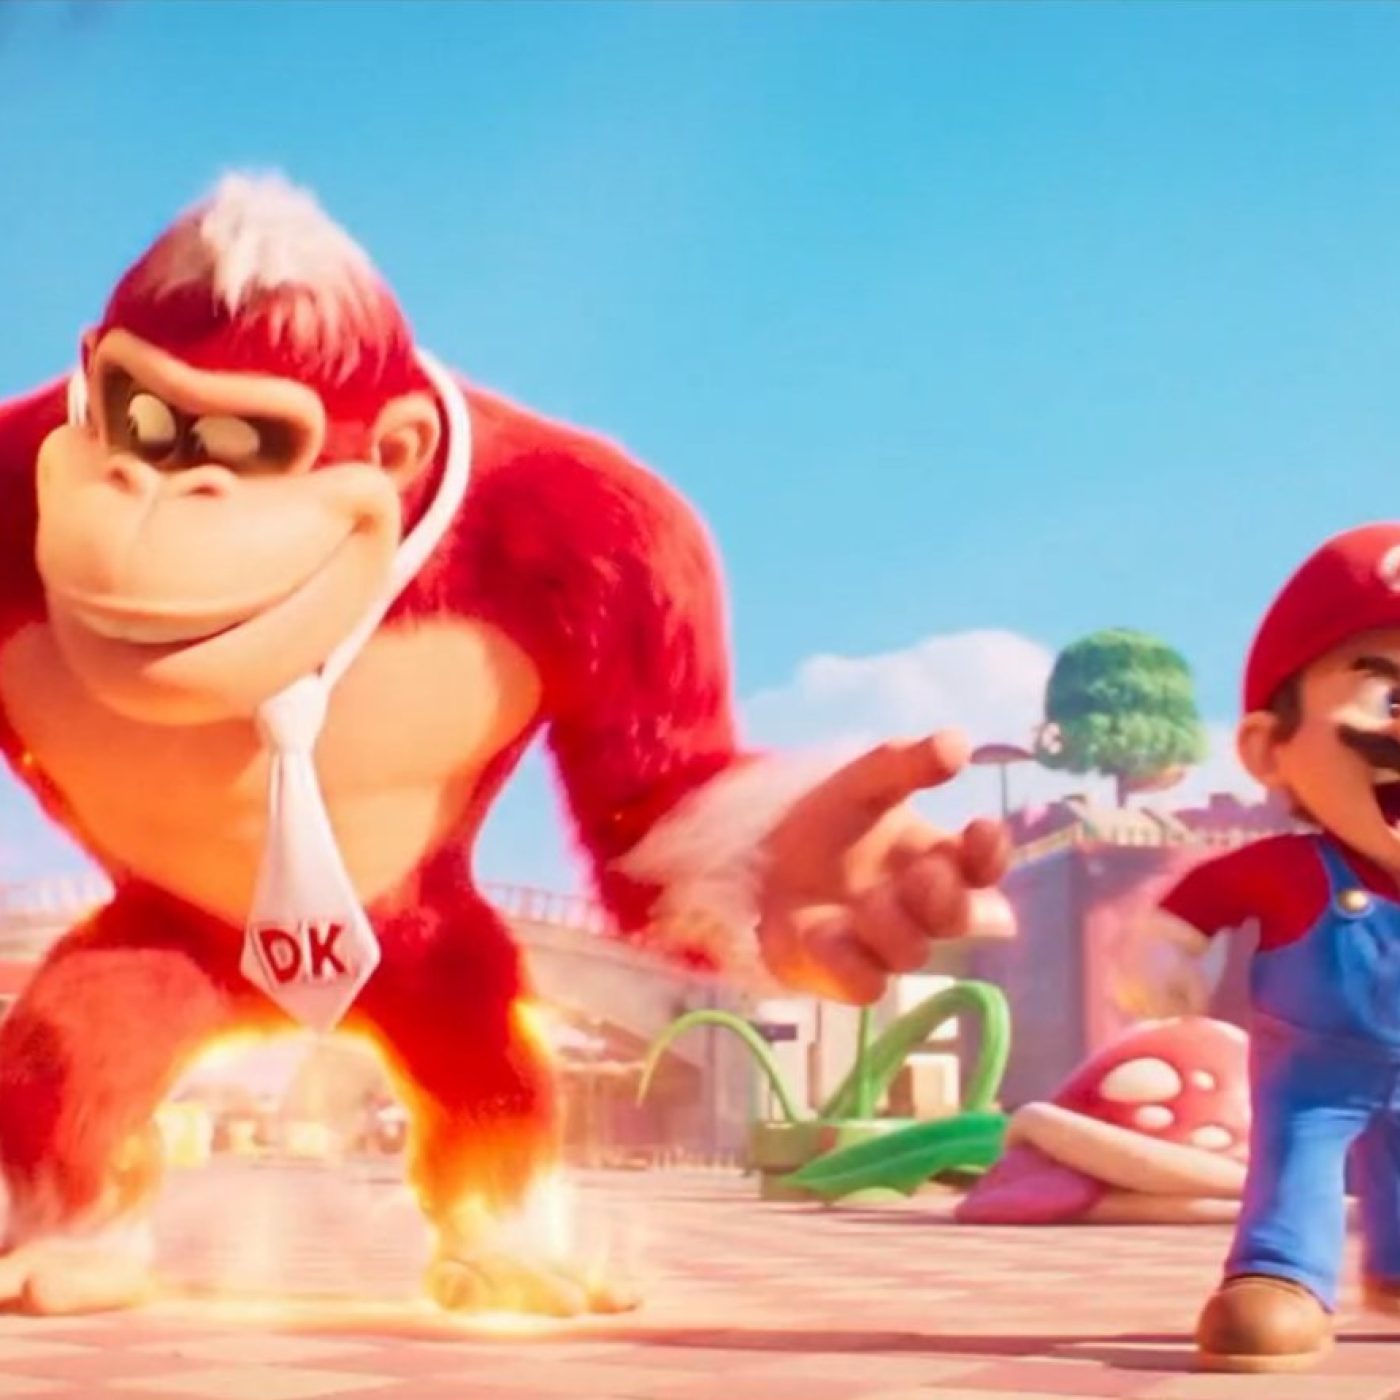 Super Mario Movie Streaming Release Date Gets Announced